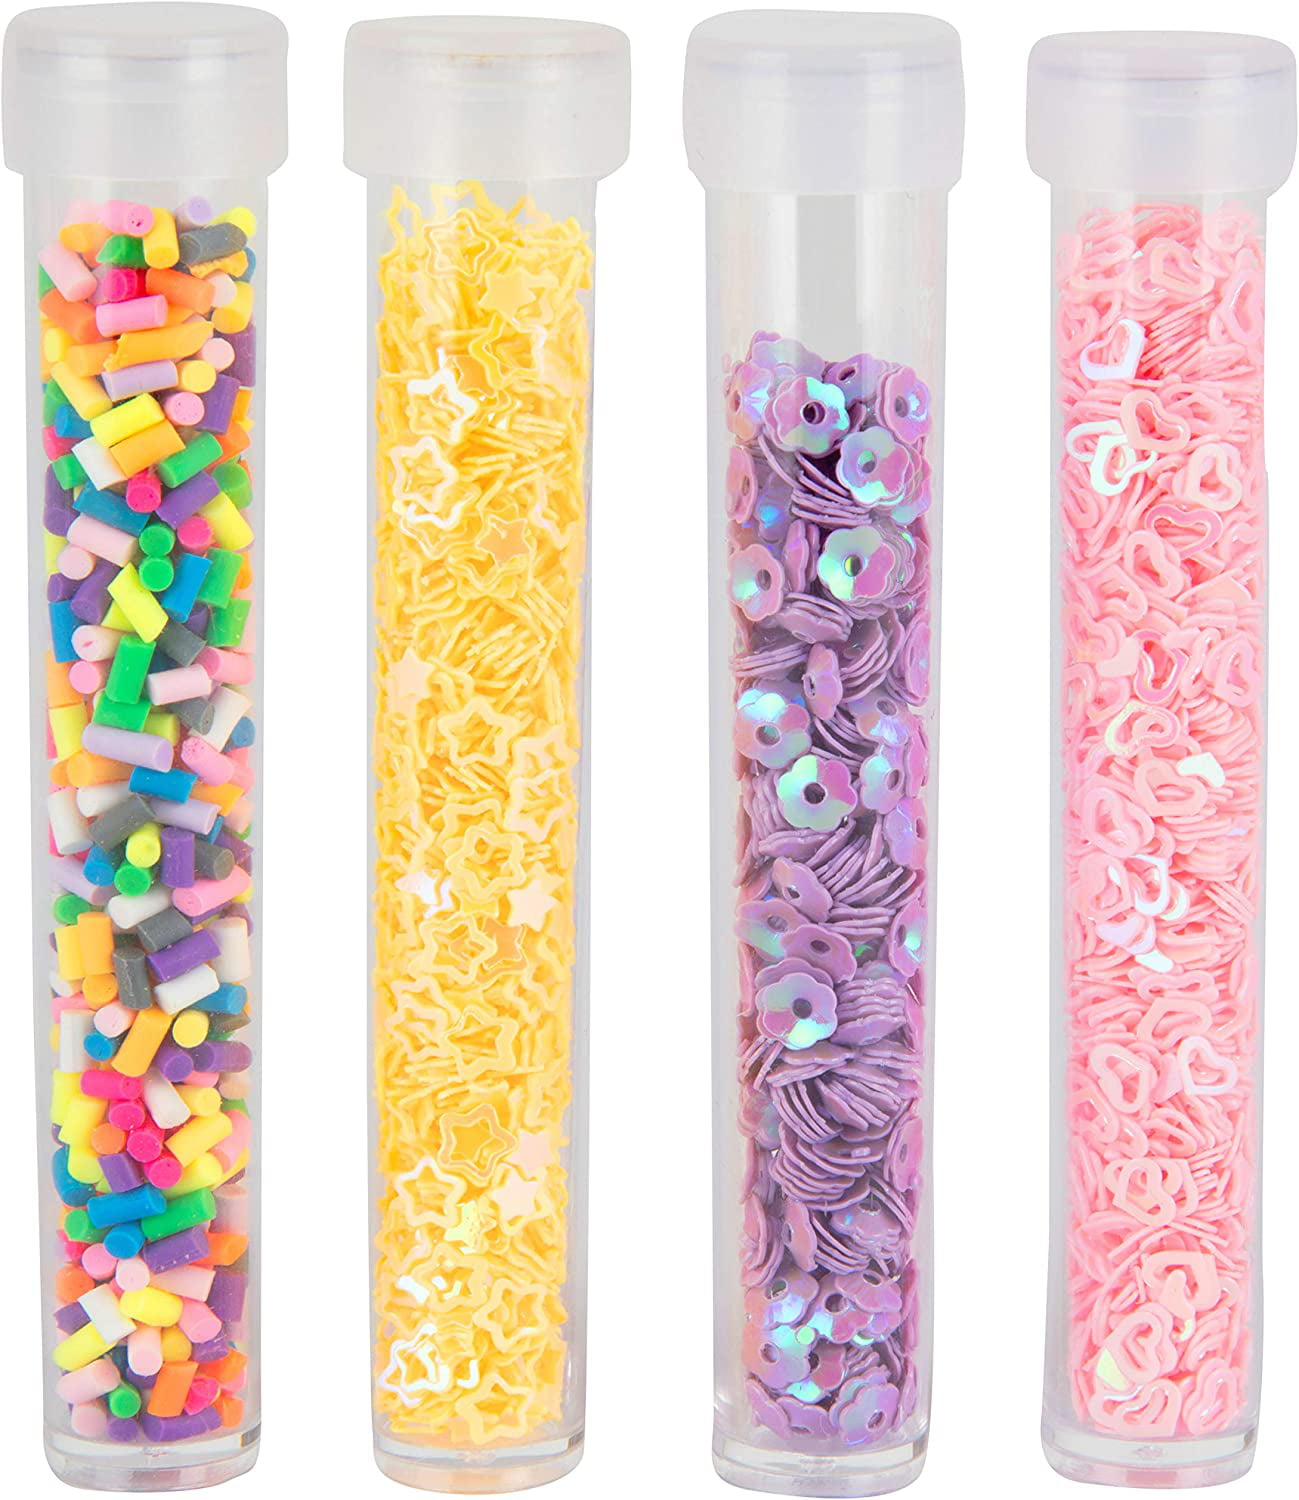 Maddie Rae's Slime Charms, Mixed Sweets 25 pcs – EDGE TRADING